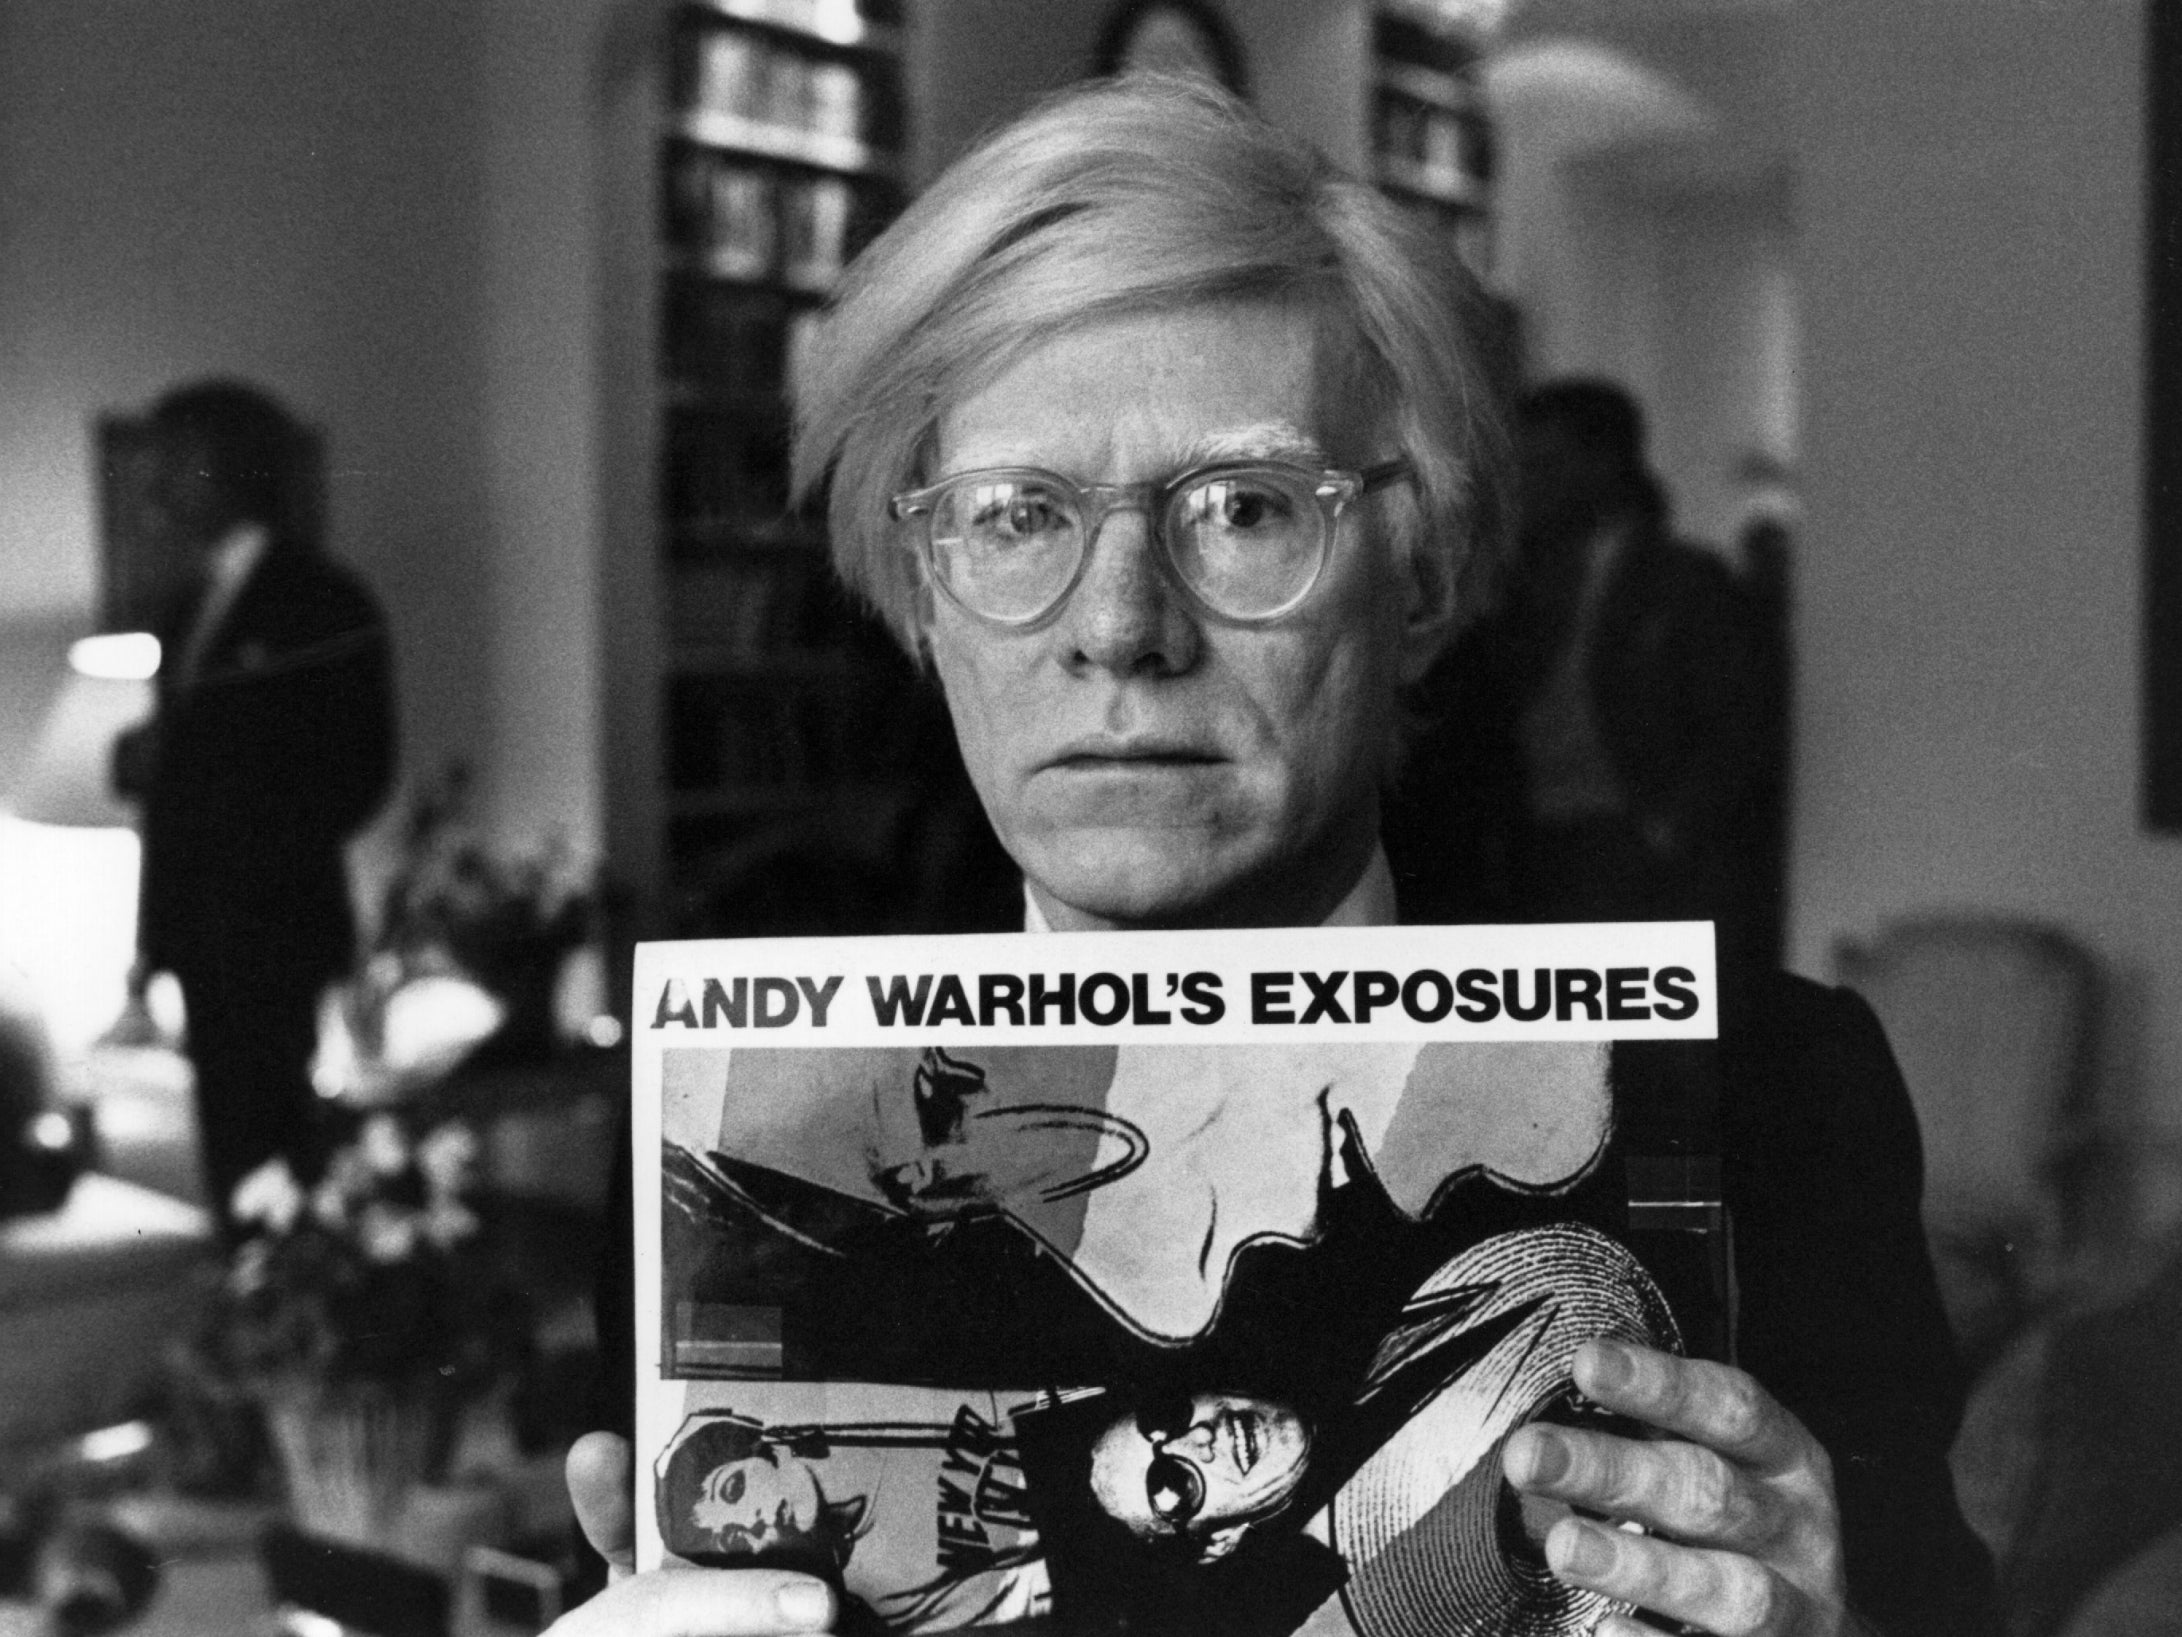 American pop artist and filmmaker Andy Warhol was born in 1928